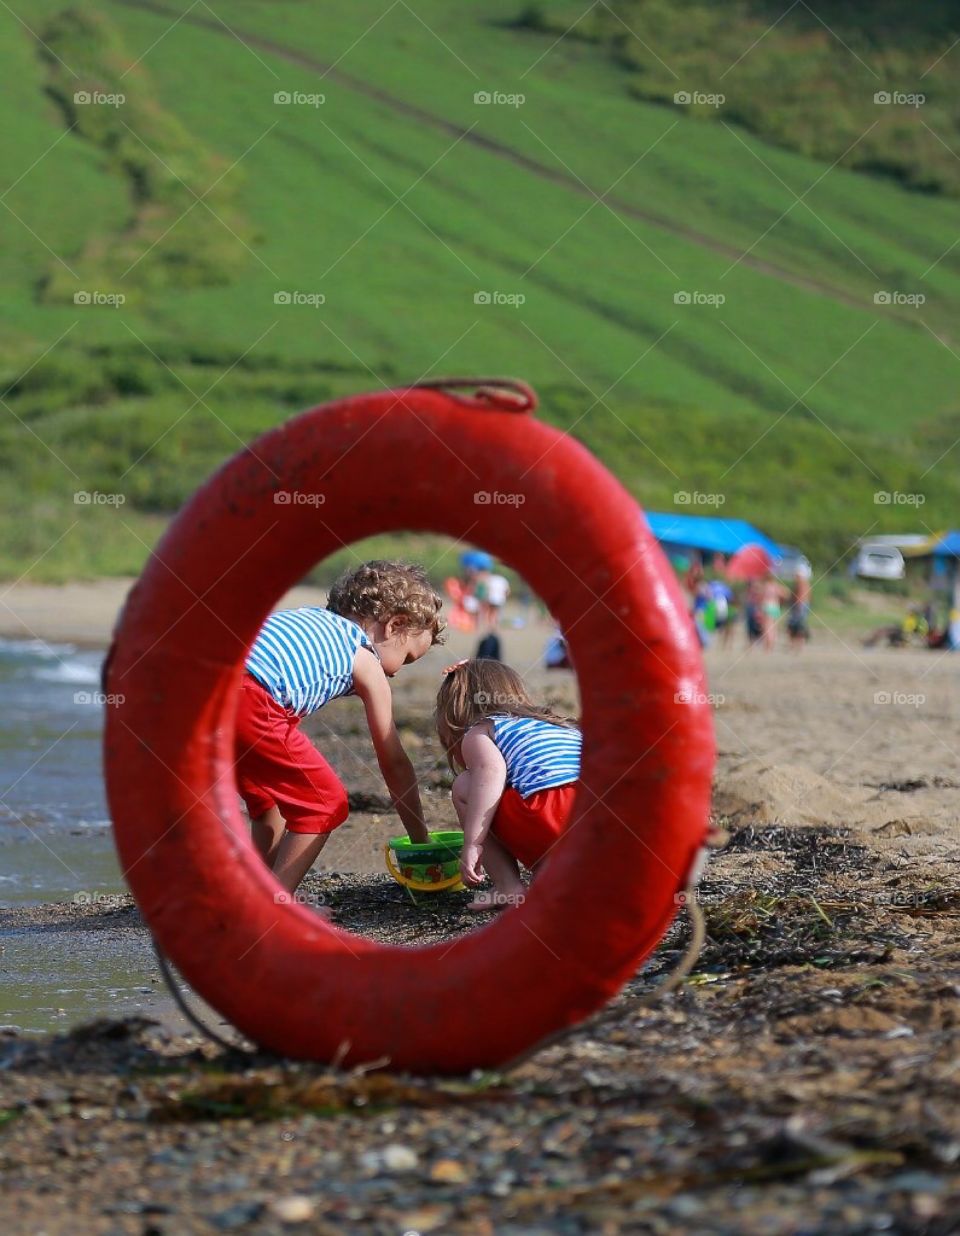 boy and girl on the beach in striped nautical shirts and red shorts play on the sand by the sea, they can be seen through a red lifebuoy, childhood, children play, sea, vacation, red